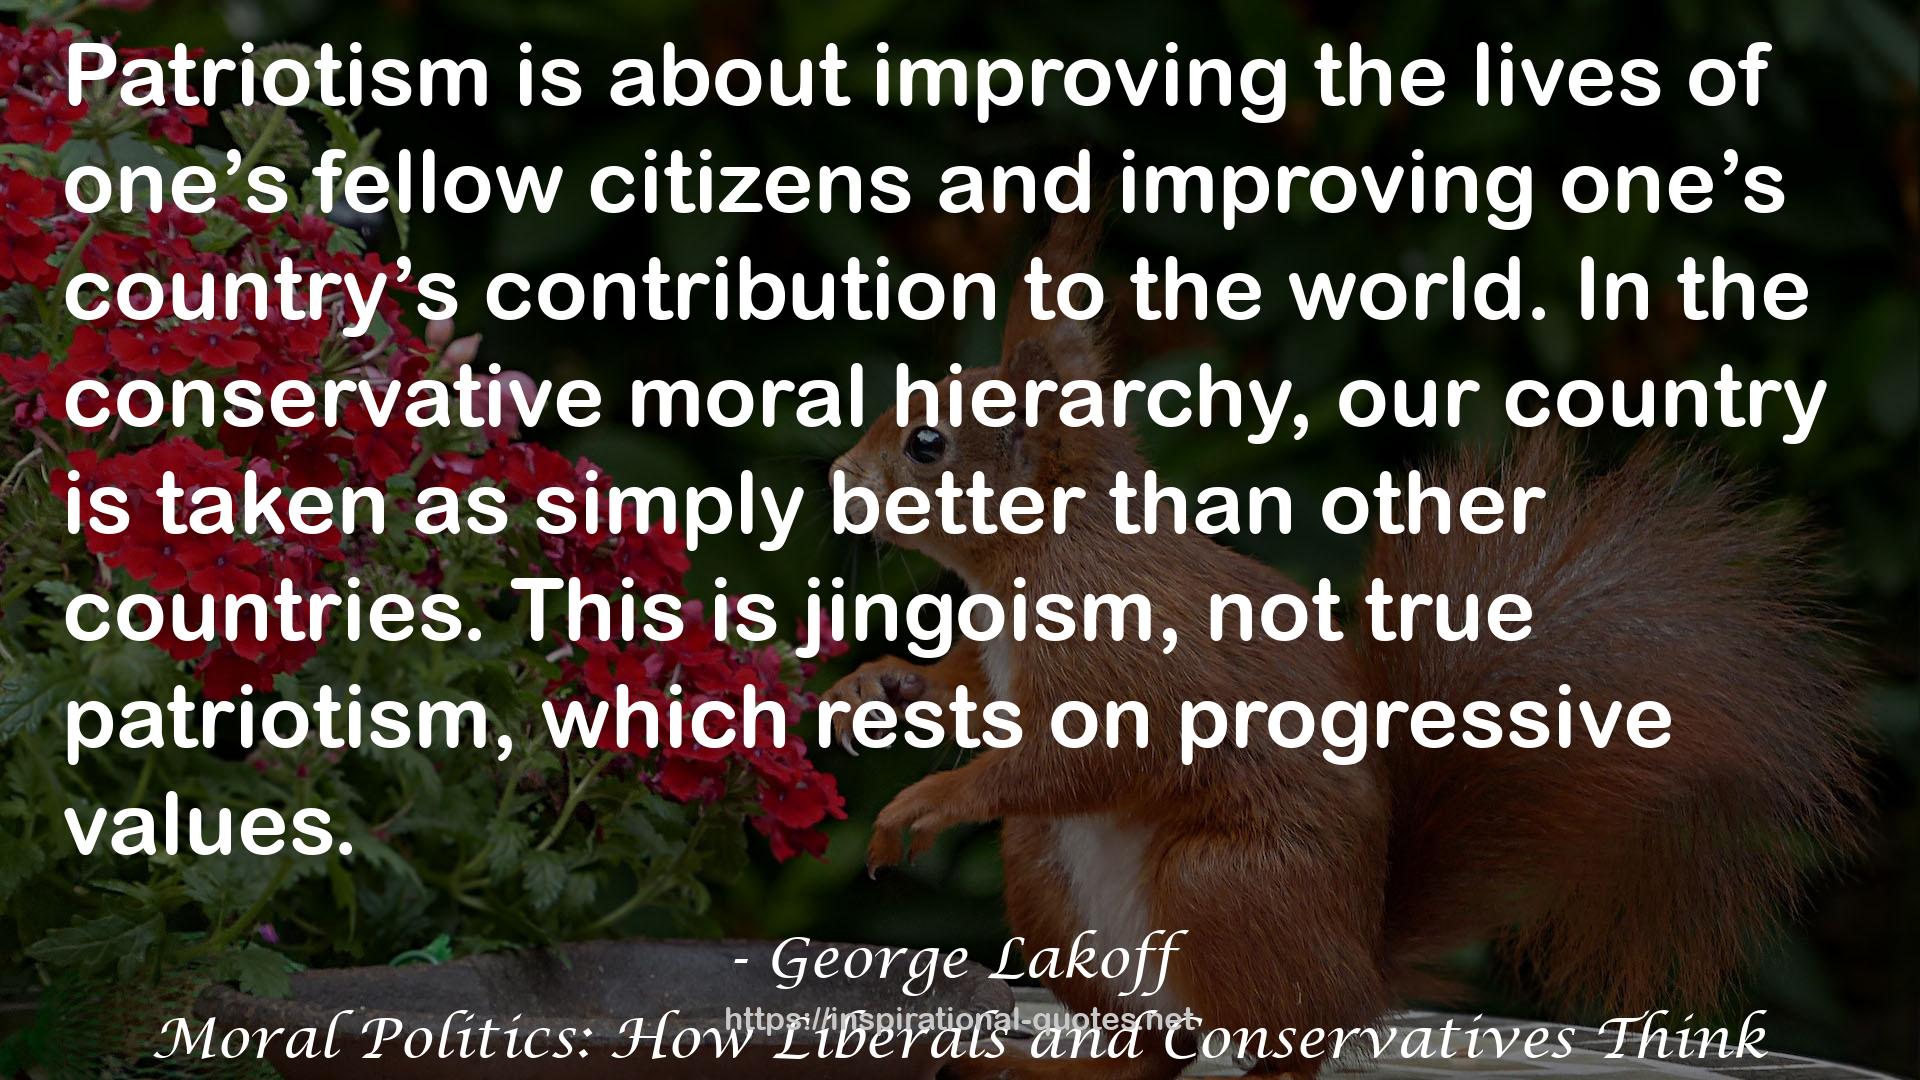 Moral Politics: How Liberals and Conservatives Think QUOTES